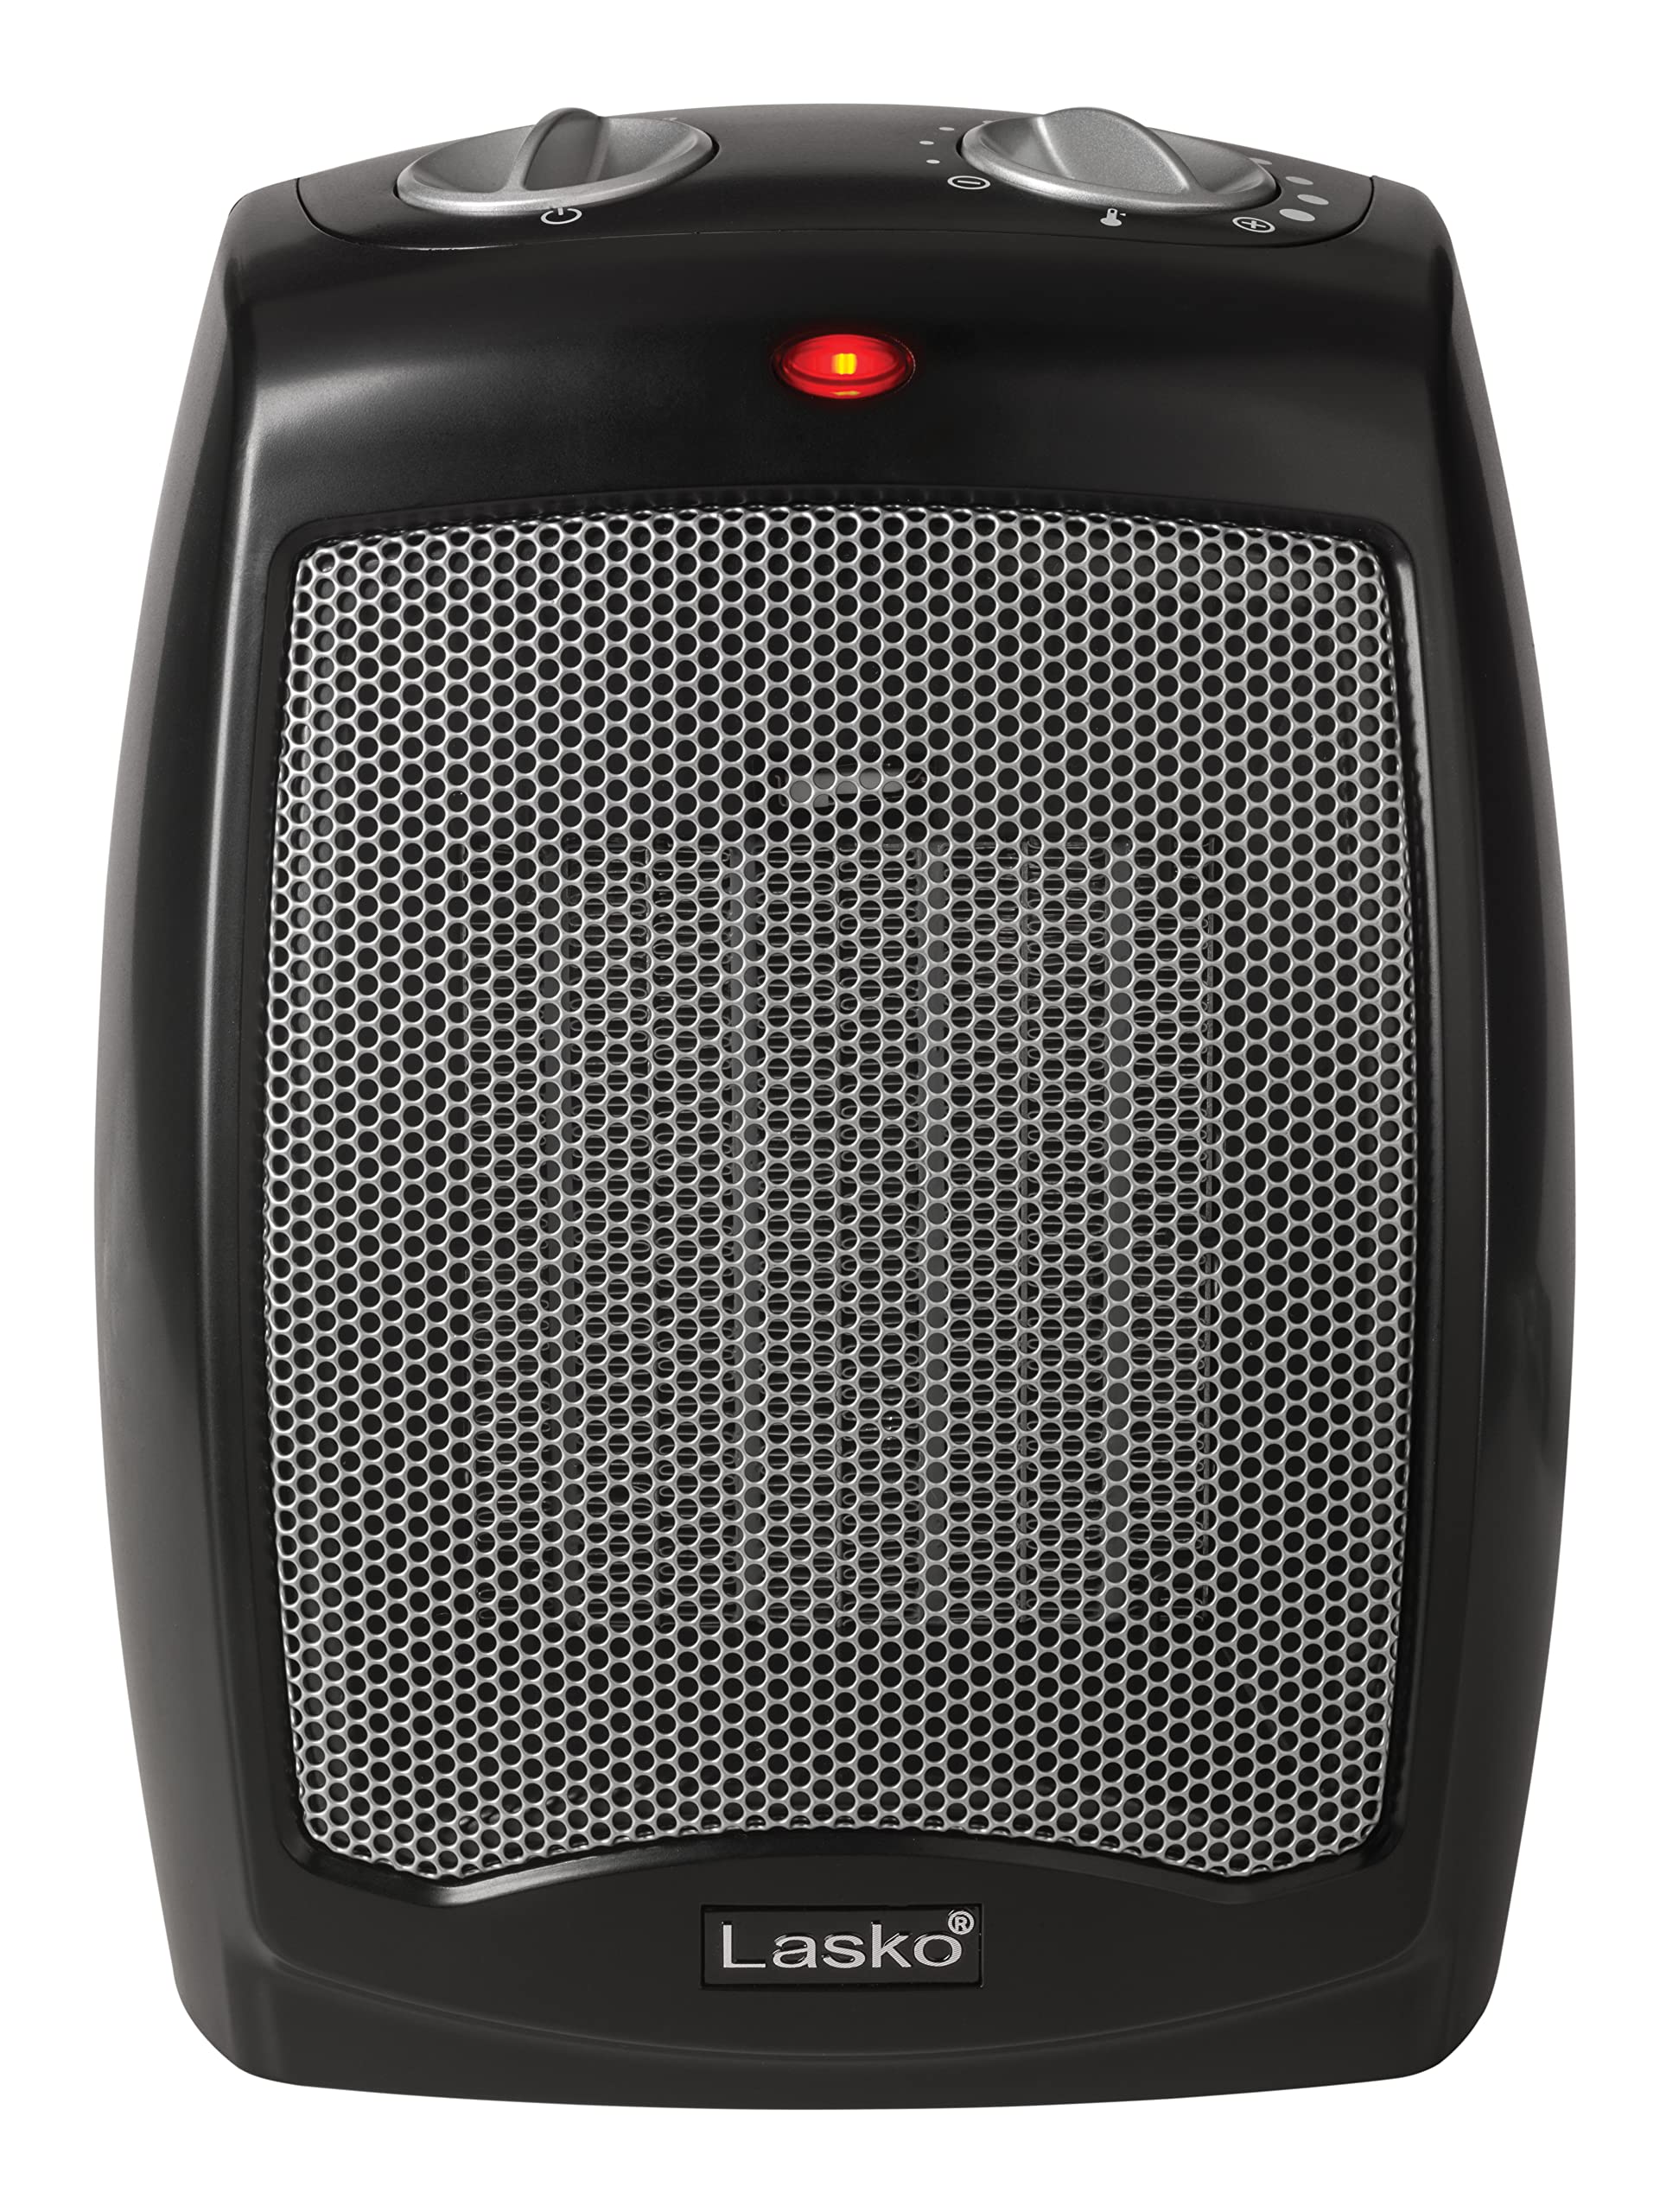 Lasko Ceramic Tabletop Space Heater for Home with Adjustable Thermostat and 2 Speeds, 9 Inches, Black, 1500W, CD09250